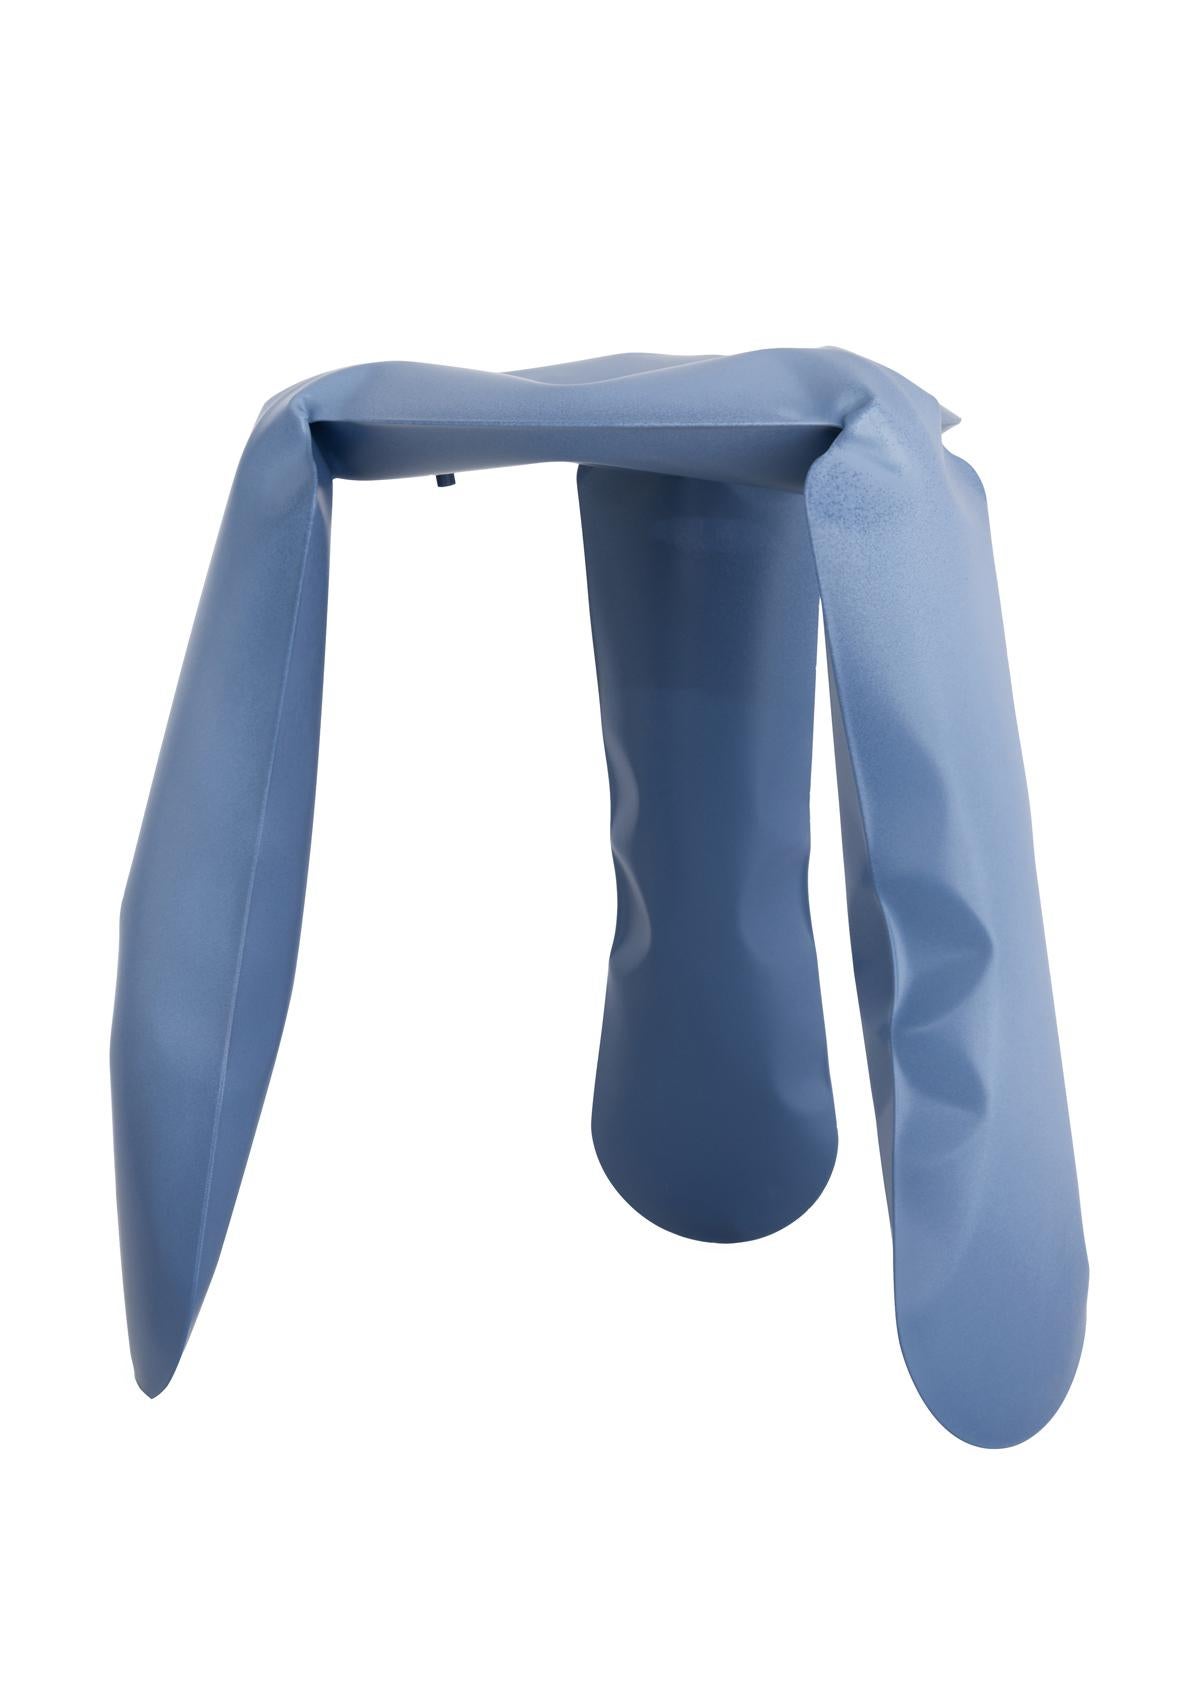 Plopp Stool by Zieta, Standard Size, Candy Collection, Blue Matt Finish In New Condition For Sale In Paris, FR